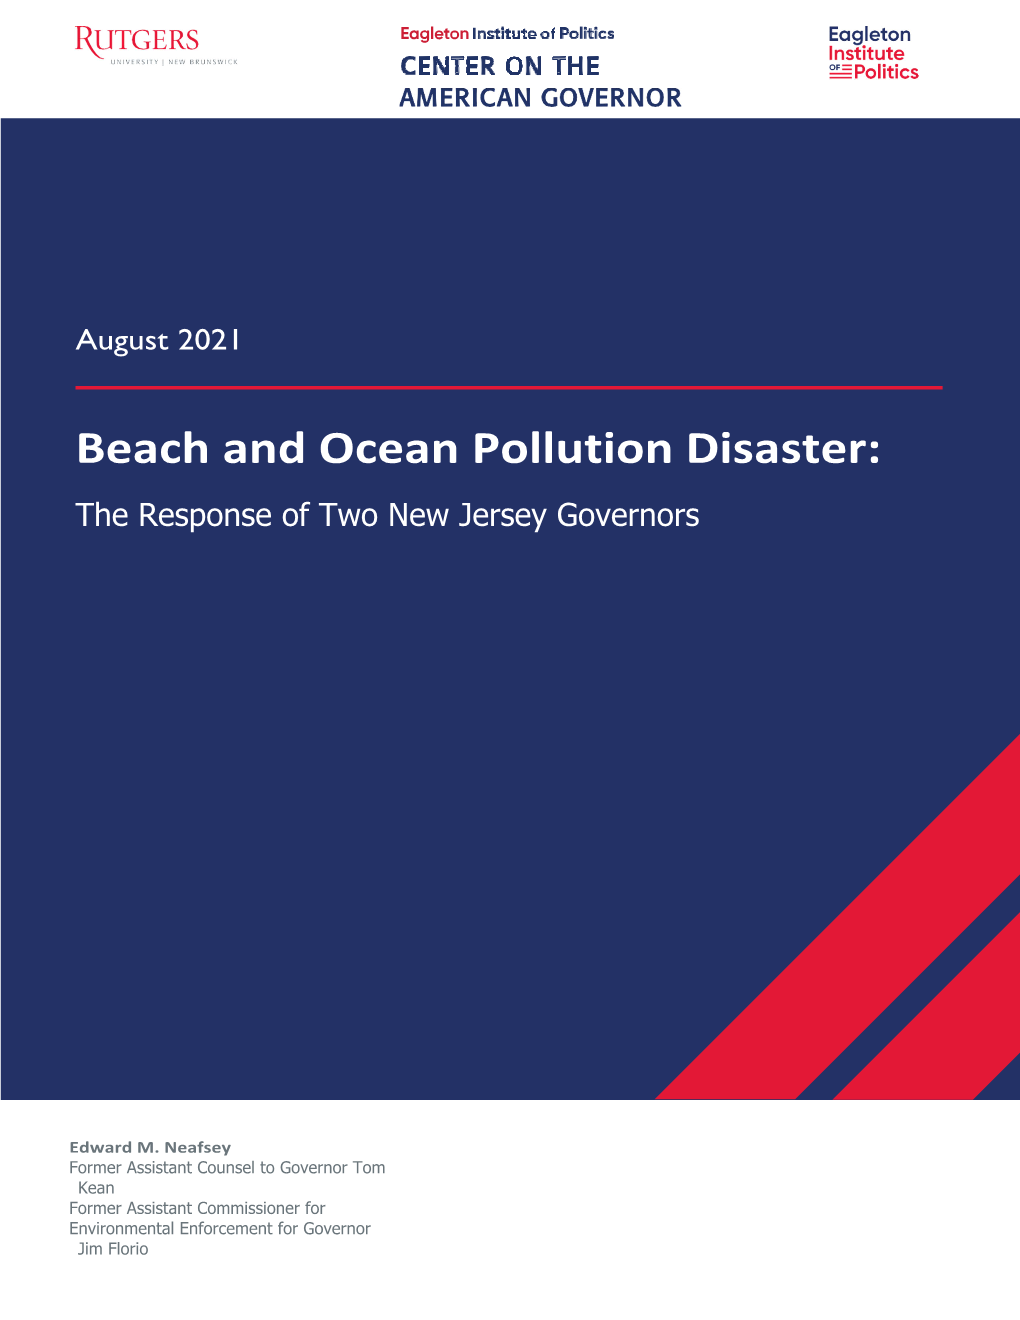 Beach and Ocean Pollution Disaster: the Response of Two New Jersey Governors